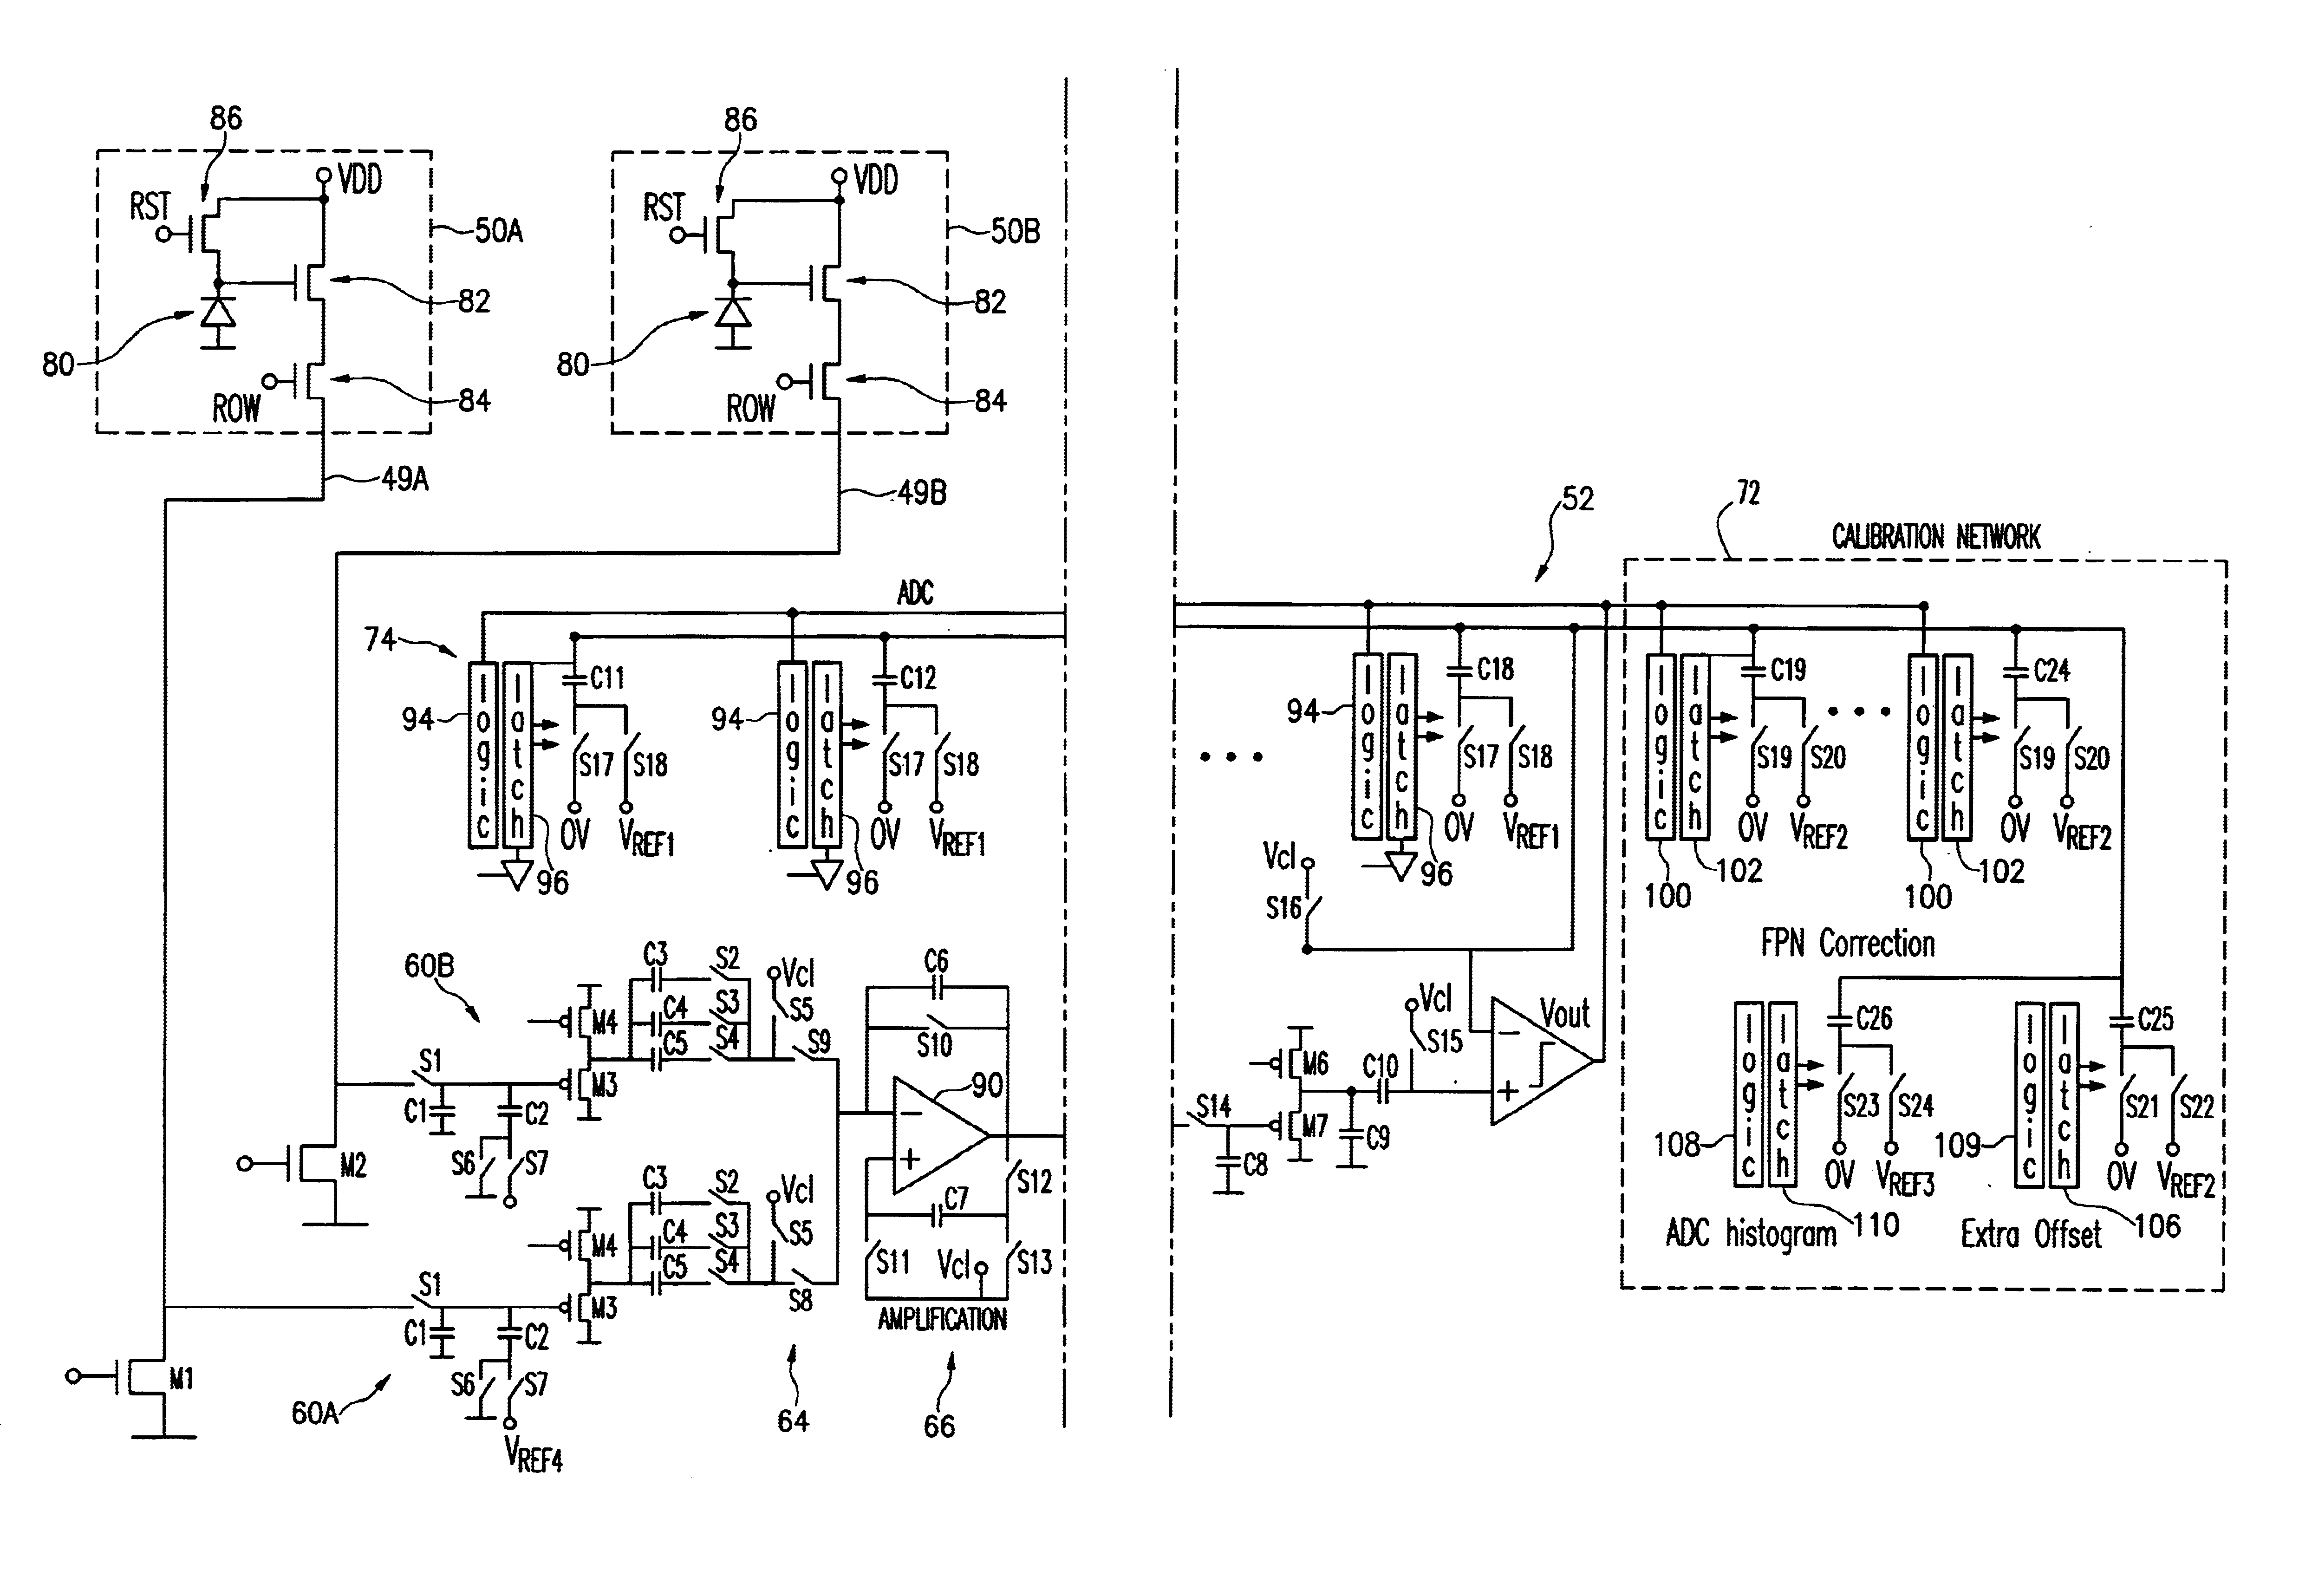 Readout circuit with gain and analog-to-digital a conversion for image sensor